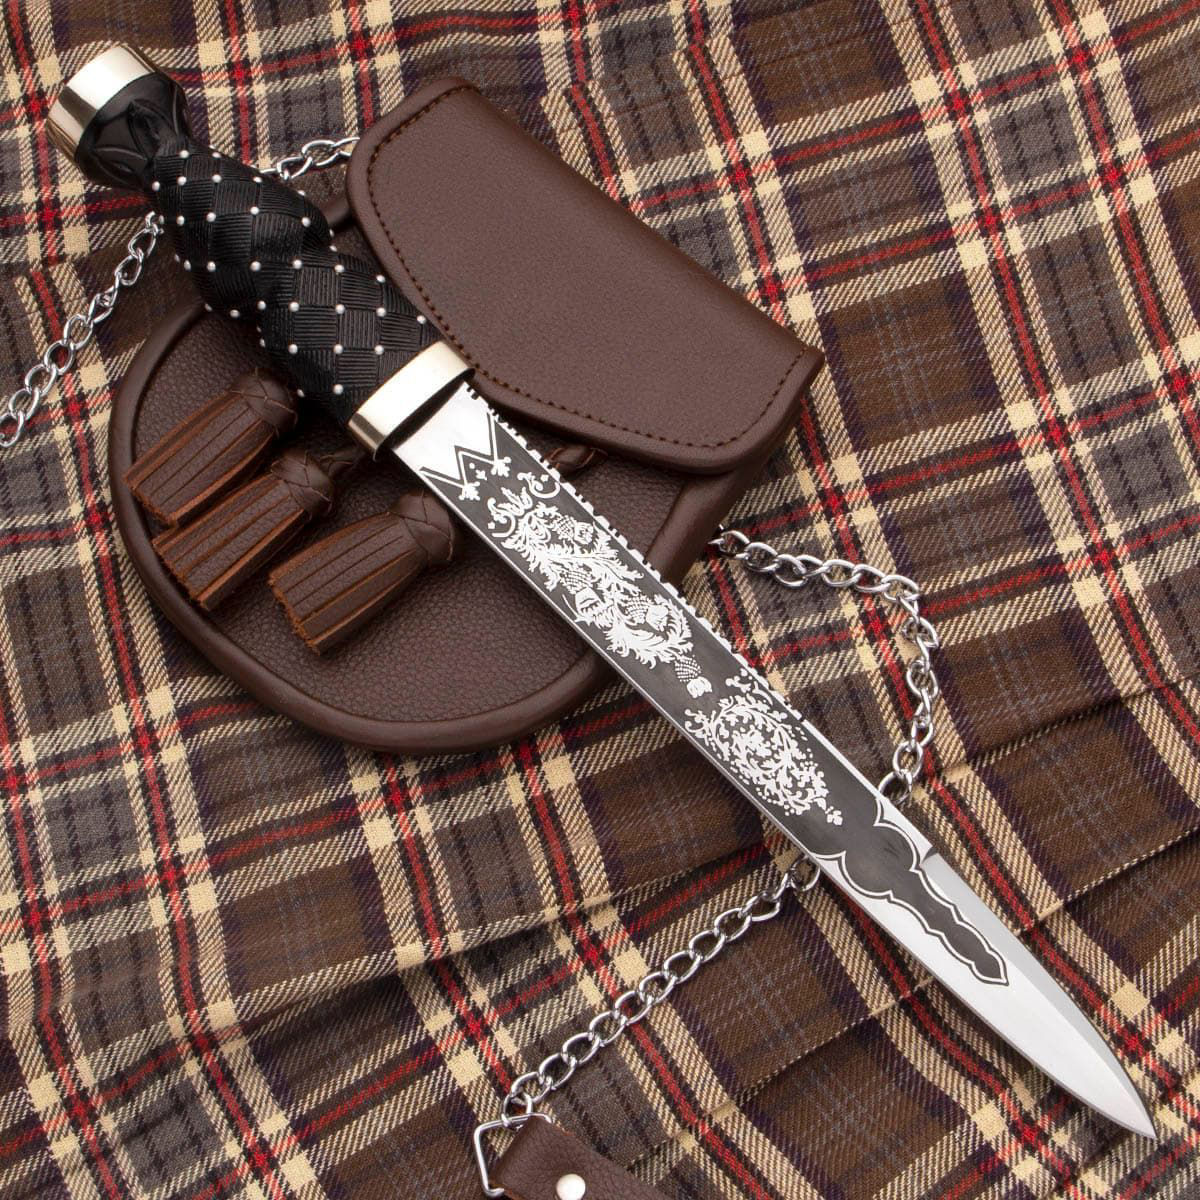 Scottish dirk has sharp 1055 high carbon steel blade etched on both sides with foliage and thistle motif, includes leather sheath